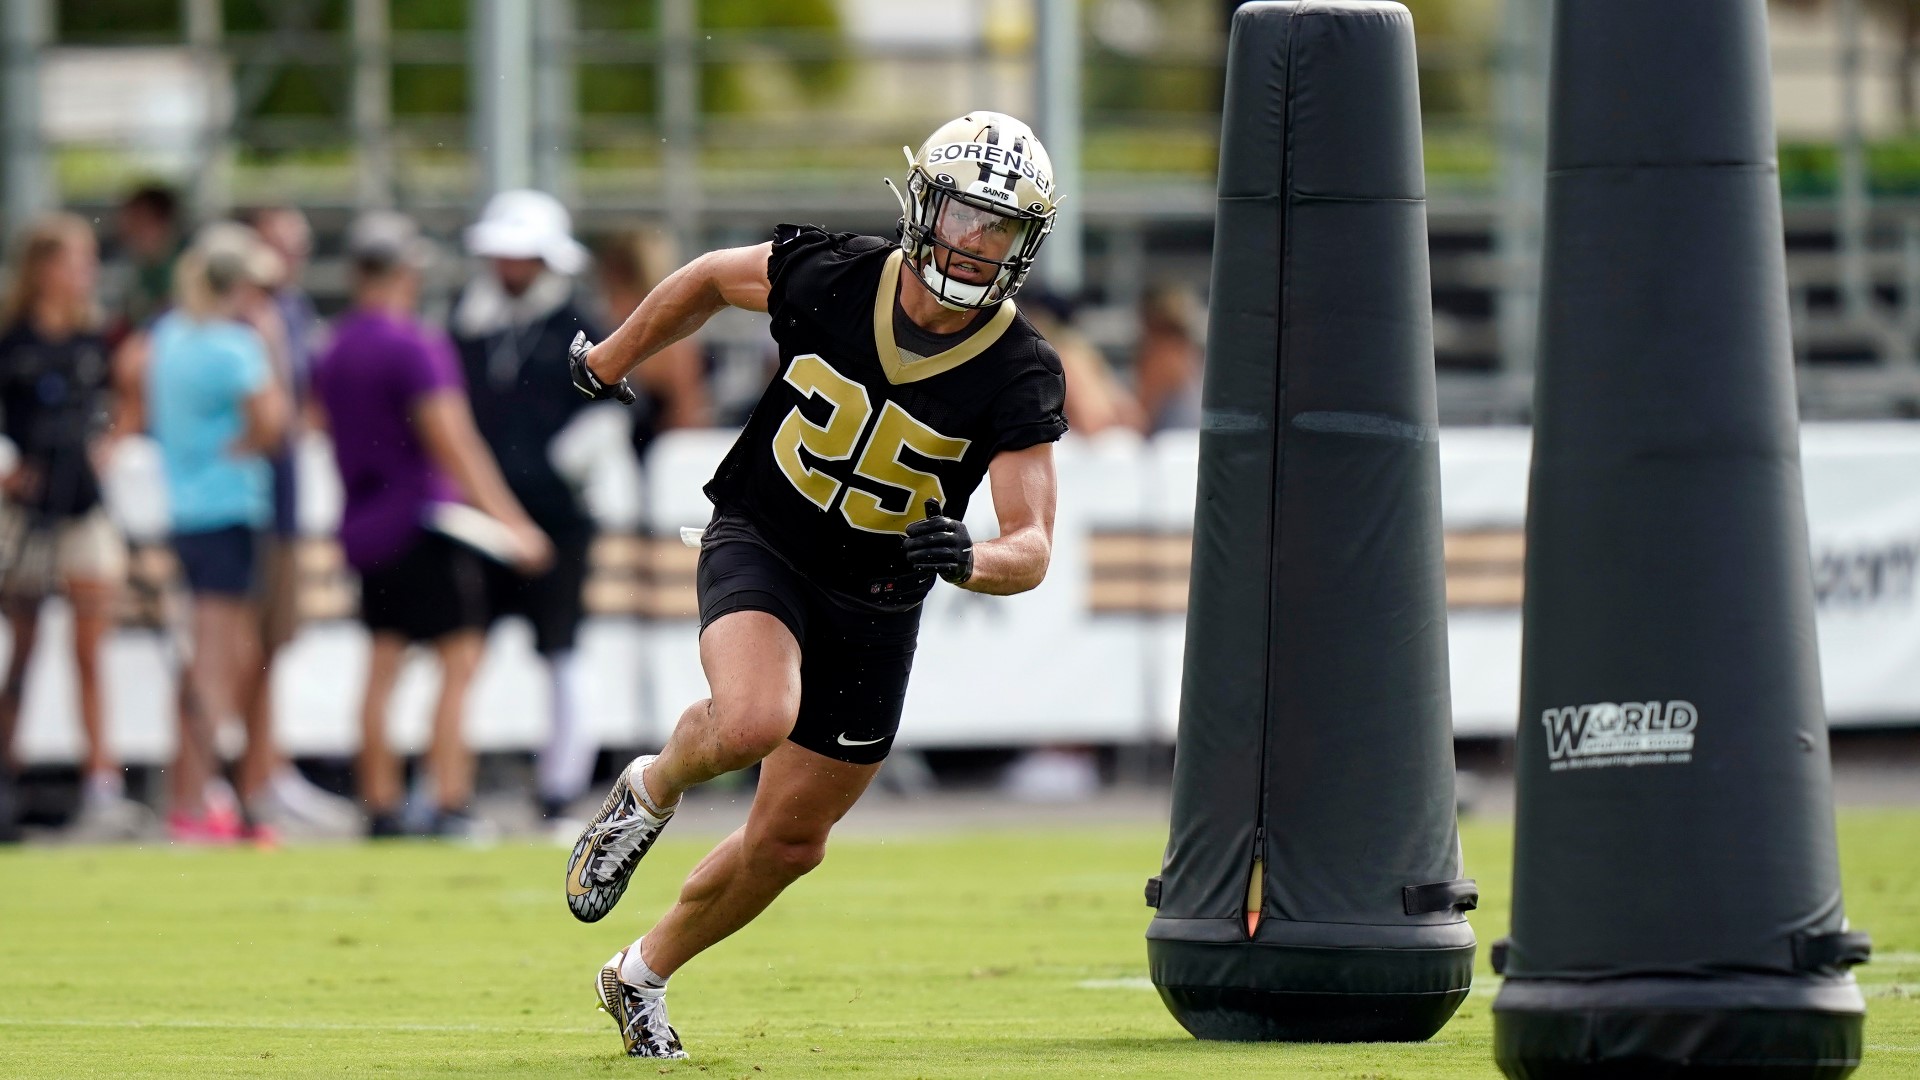 WWL-TV's Doug Mouton and Richardo LeCompte break down Day 2 of New Orleans Saints training camp.